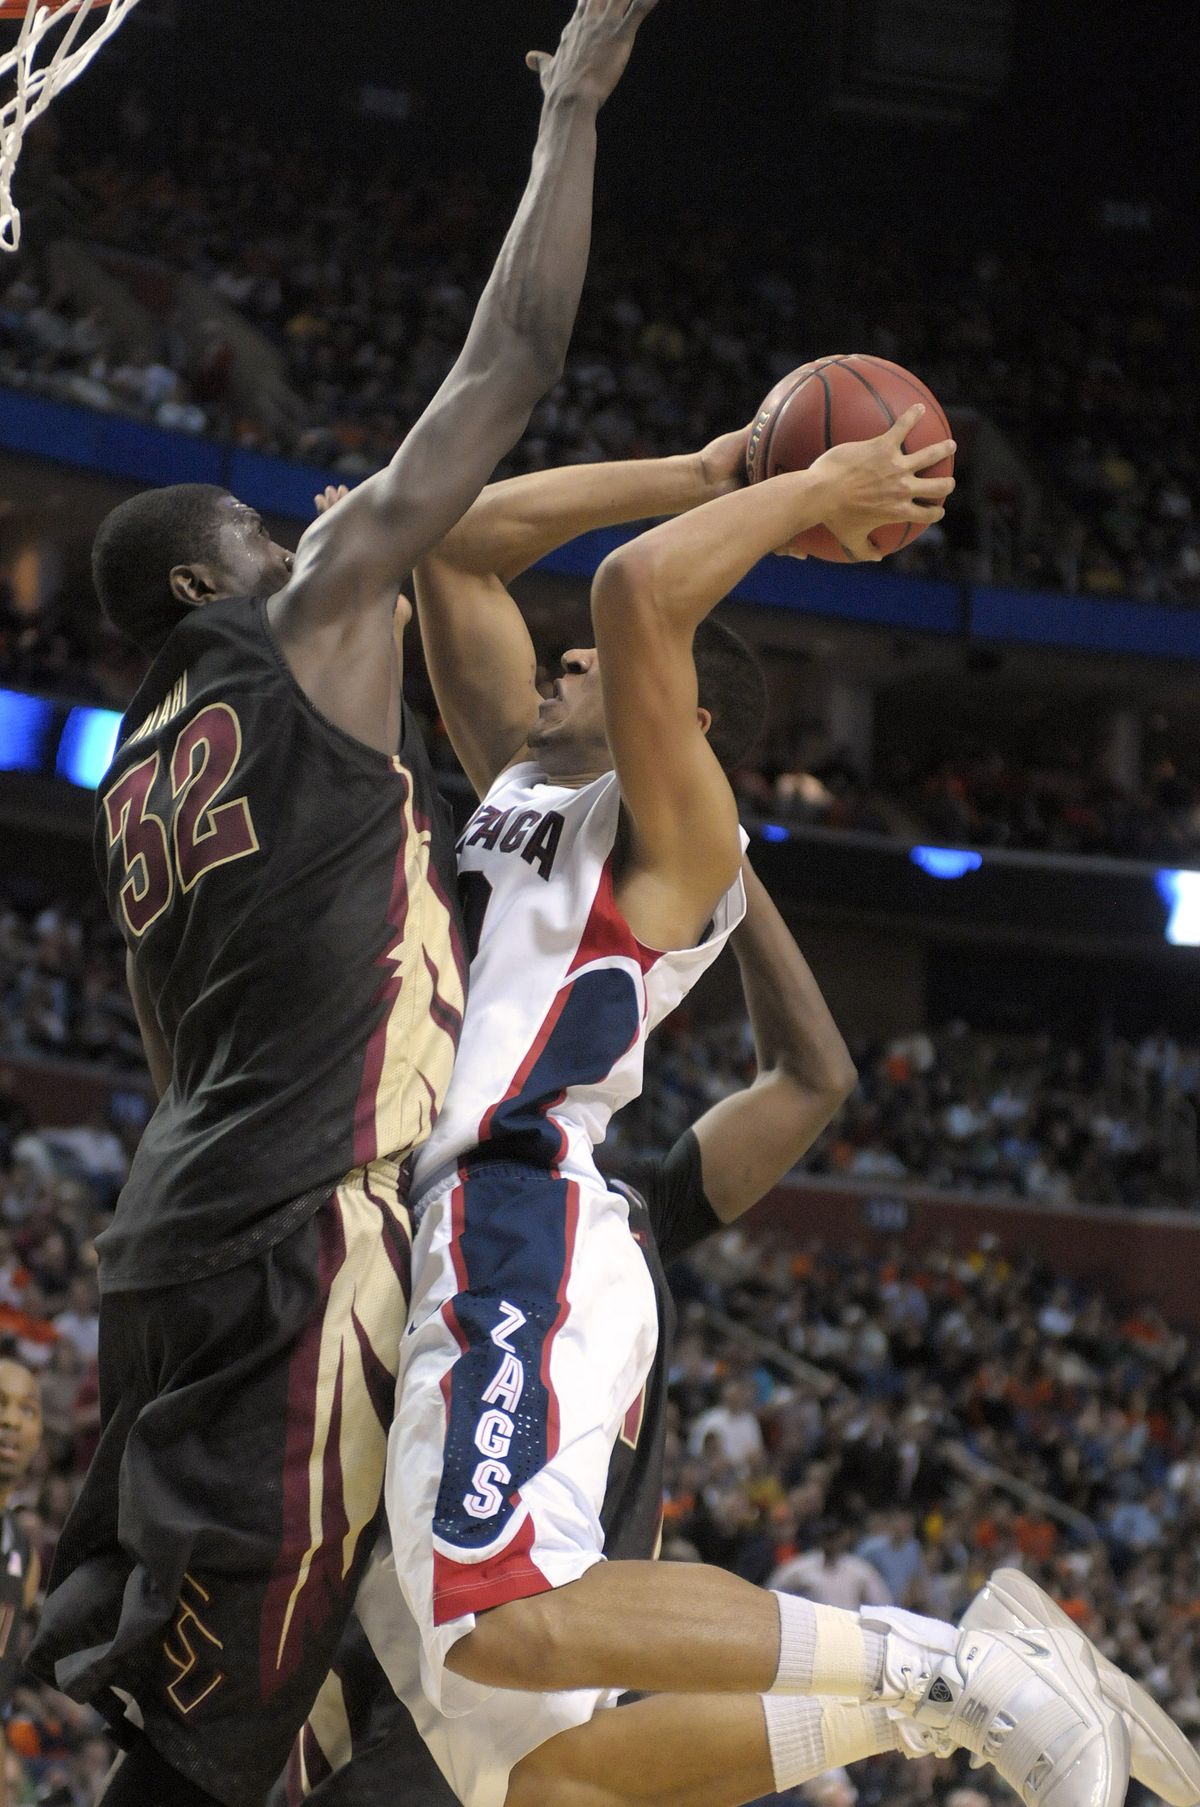 Elias Harris of Gonzaga drives to the basket against Solomon Alabi of Florida State in the second half of their opening-round NCAA tournament game Friday, March 19, 2010, in in Buffalo. Alabi blocked the shot, but Gonzaga went on to win, 67-60. (Christopher Anderson / Spokesman-Review)